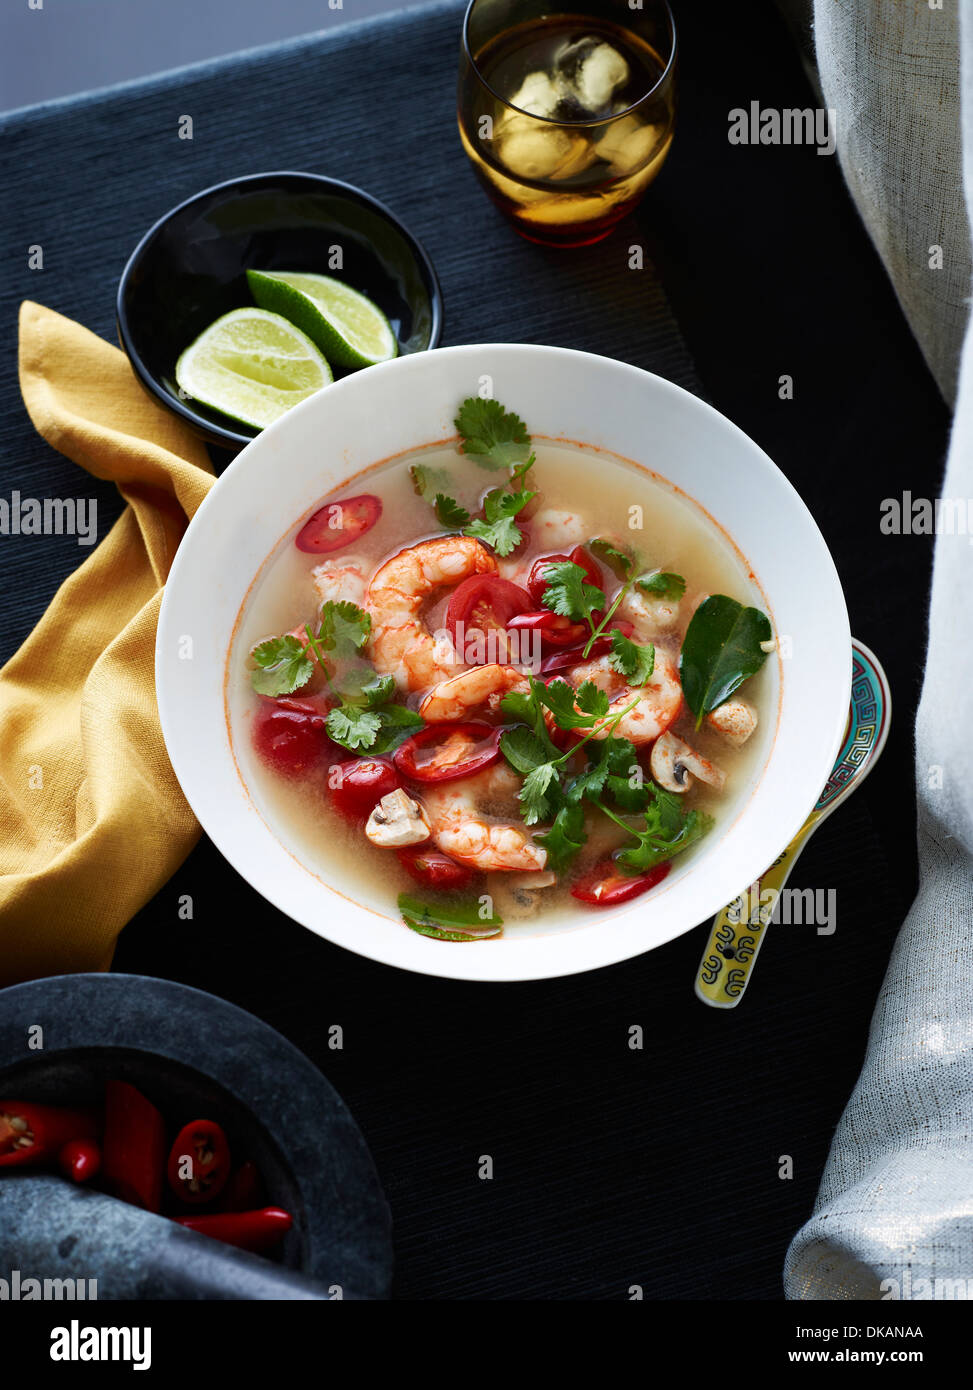 Bowl of Tom yum soup with herb garnish Stock Photo